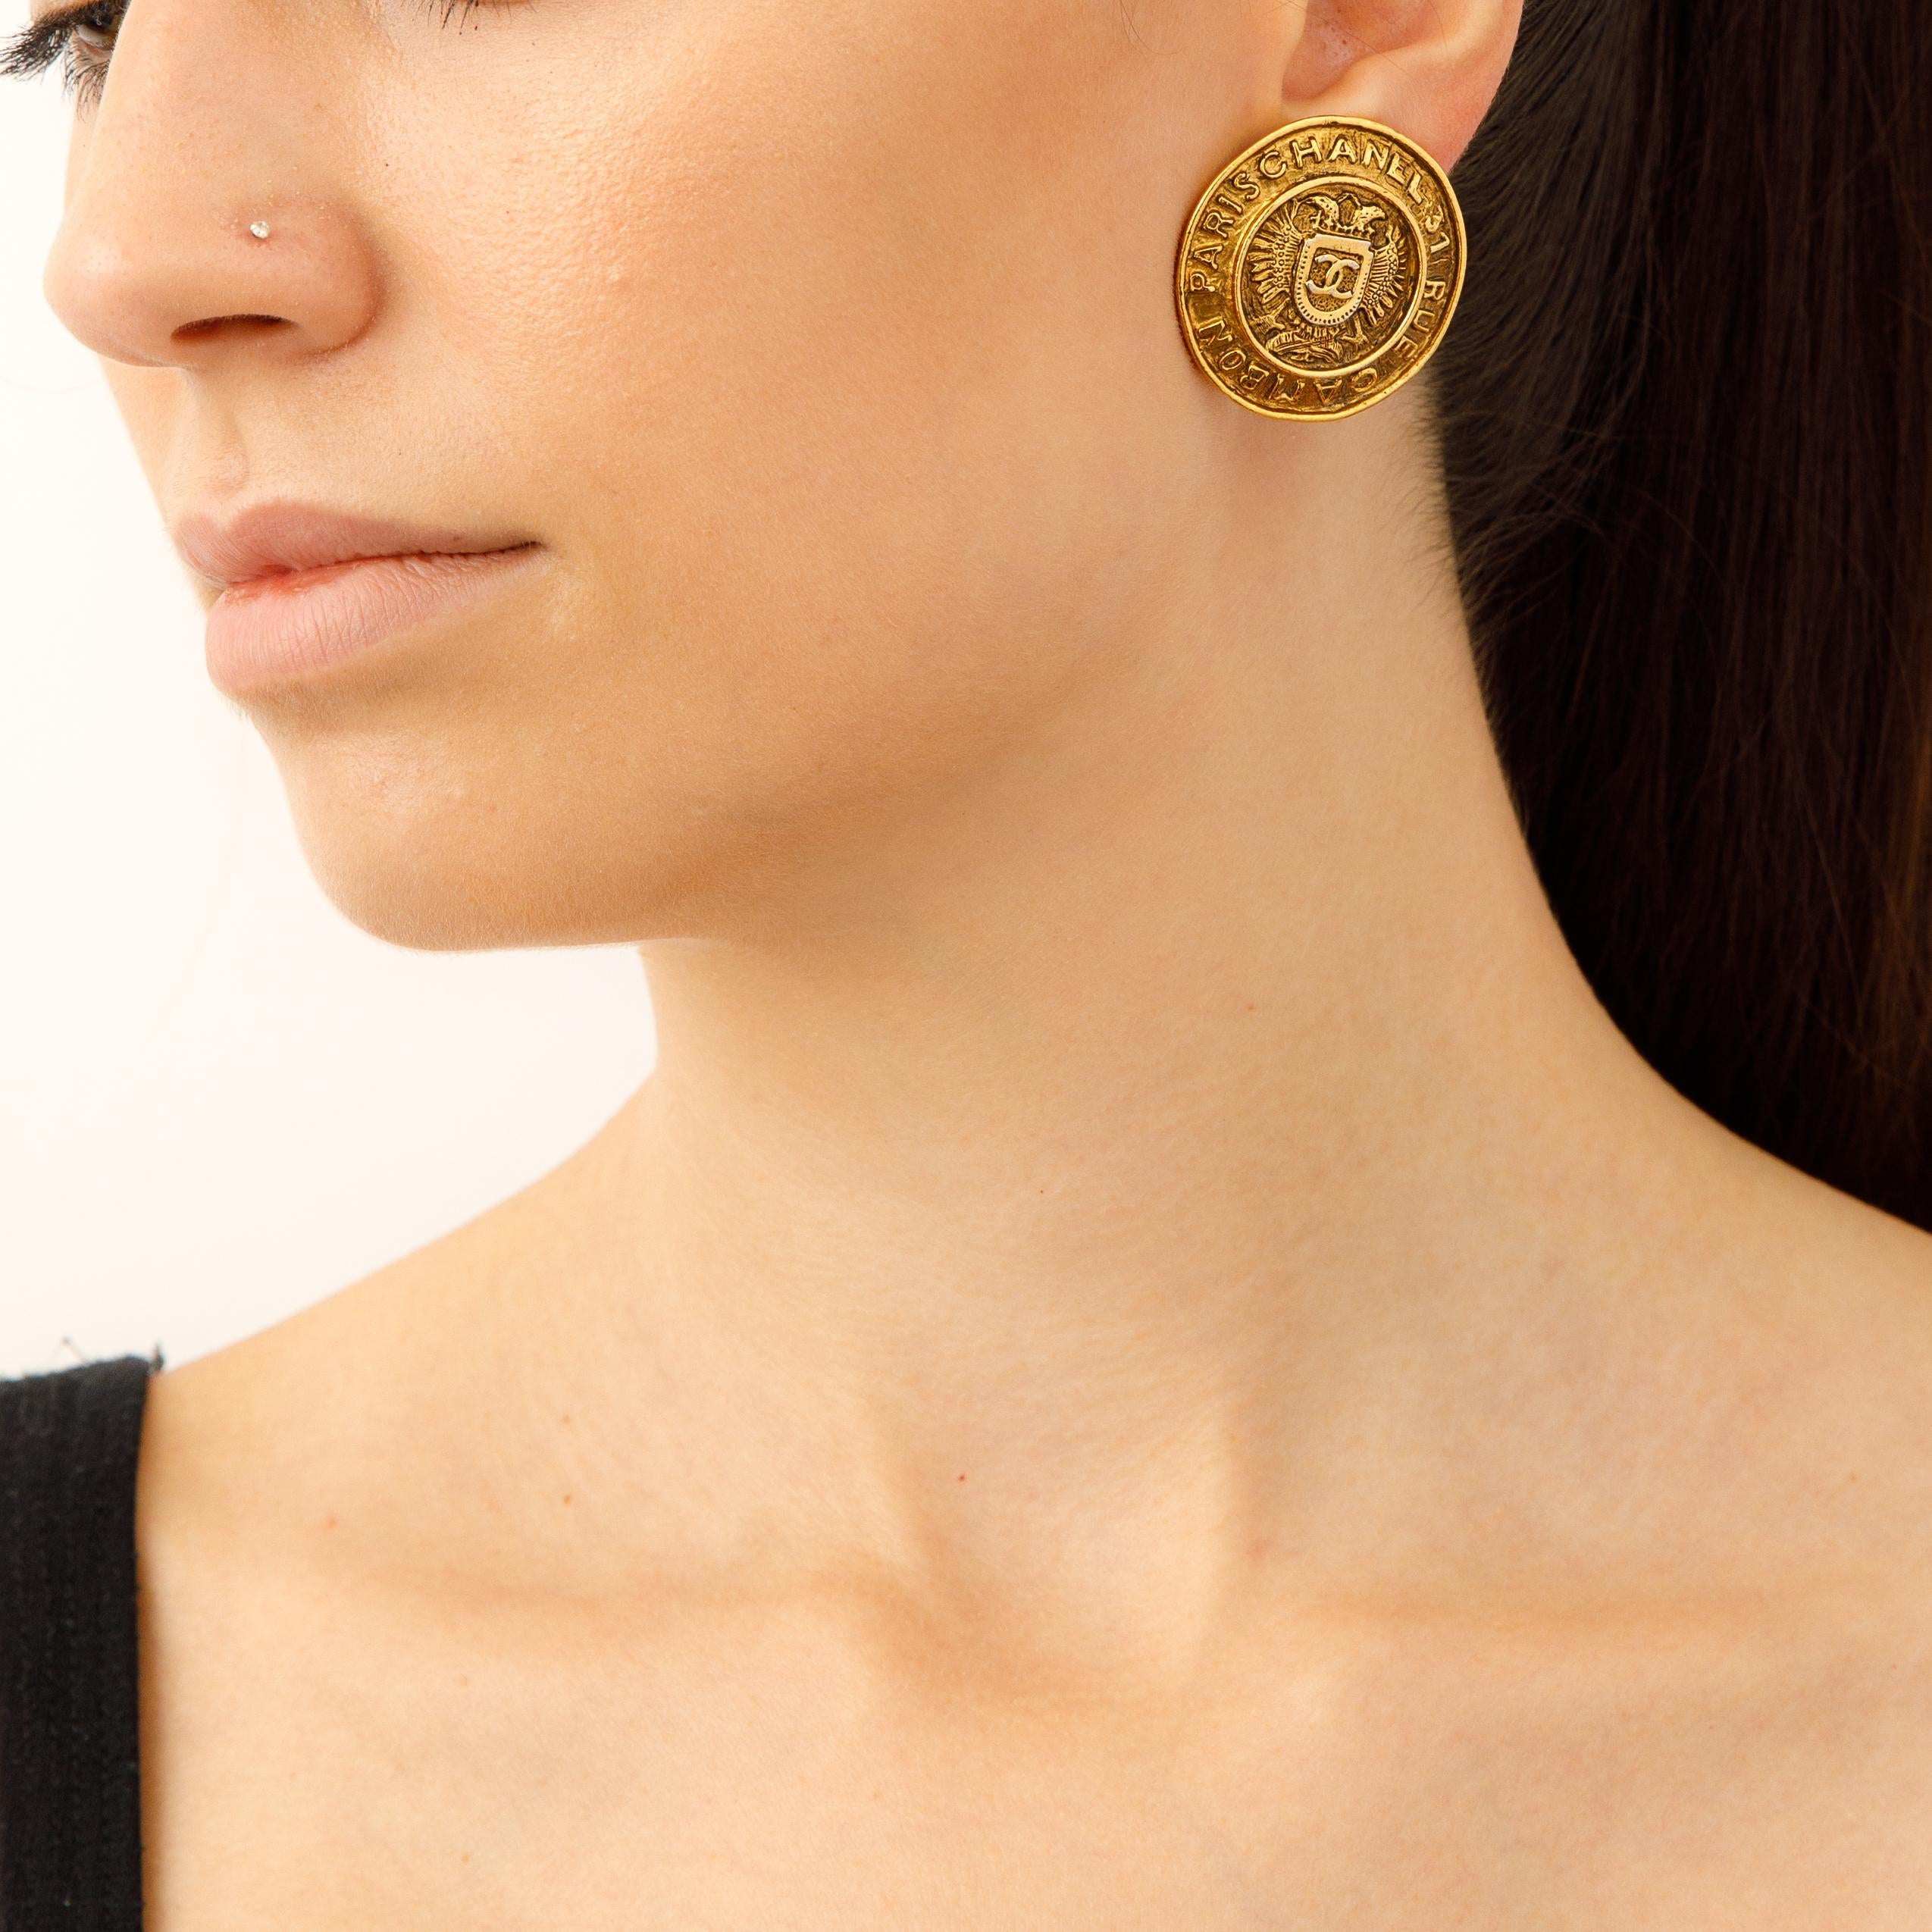 Treat yourself to an exquisite piece of history with these Vintage Chanel Rue Cambon Crest Earrings. From the golden tones to the iconic crest detailing, these earrings are an iconic statement of timeless elegance. Perfect for adding a polished